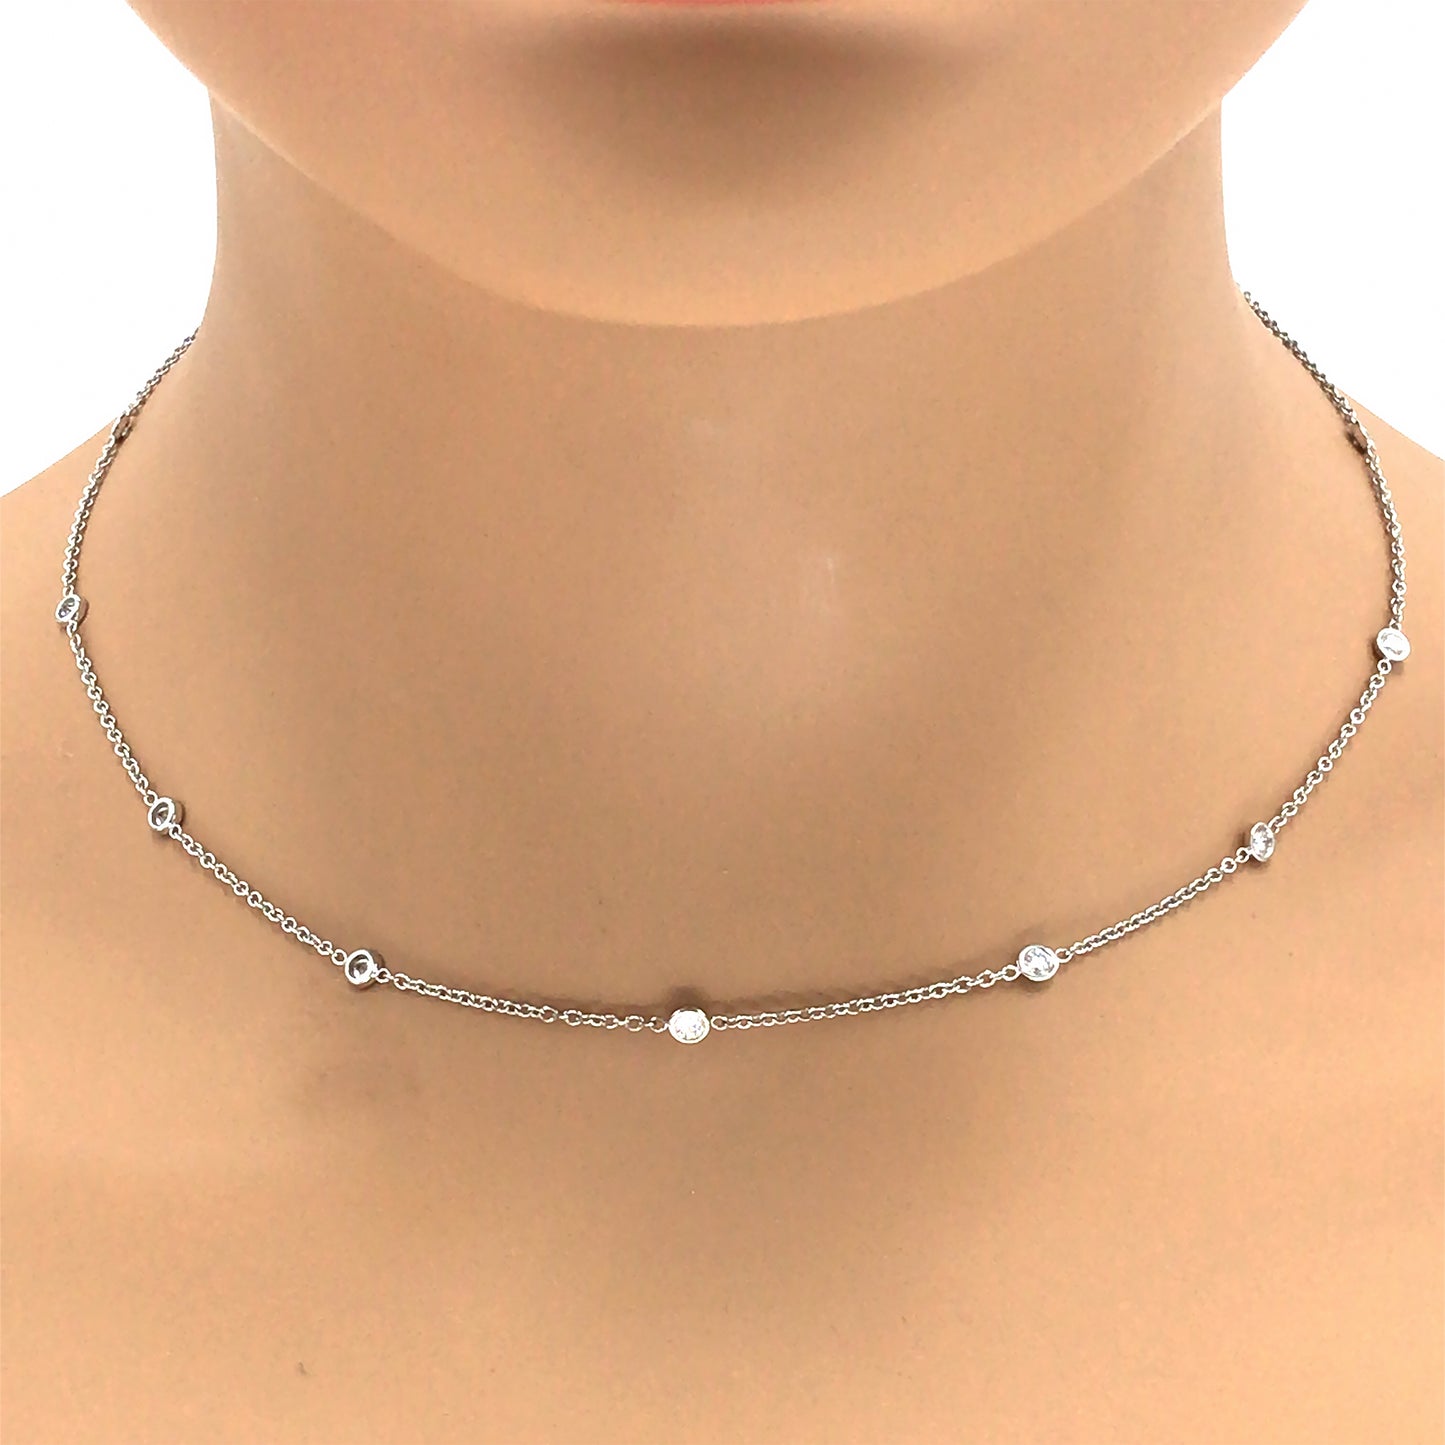 18k White Gold Diamond By The Yard Necklace